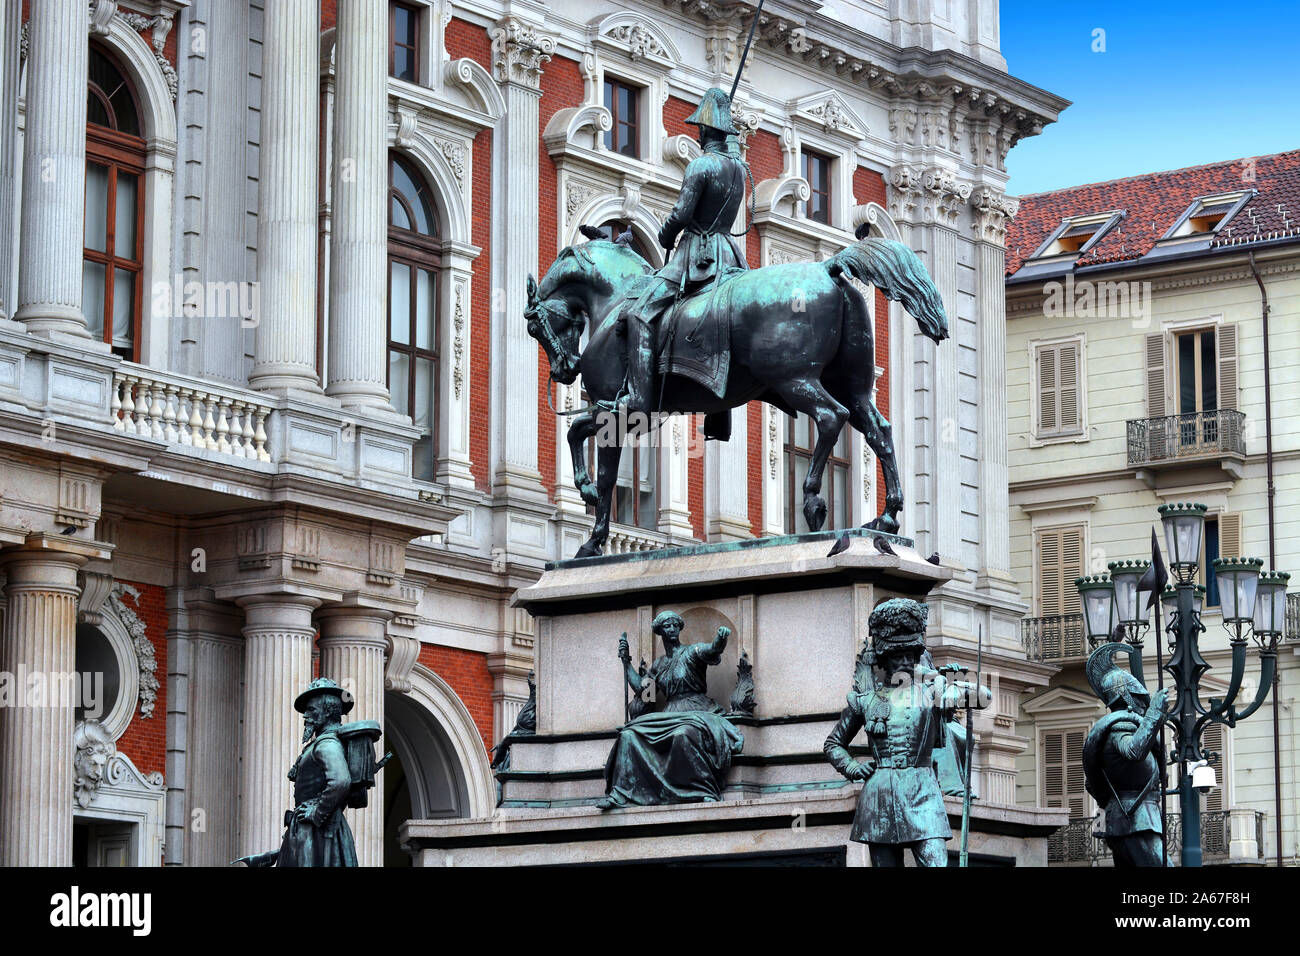 Turin, Piedmont/Italy -04/20/2019- Turin the equestrian statue of Carlo Alberto of Savoy and the Risorgimento Museum on background. Stock Photo